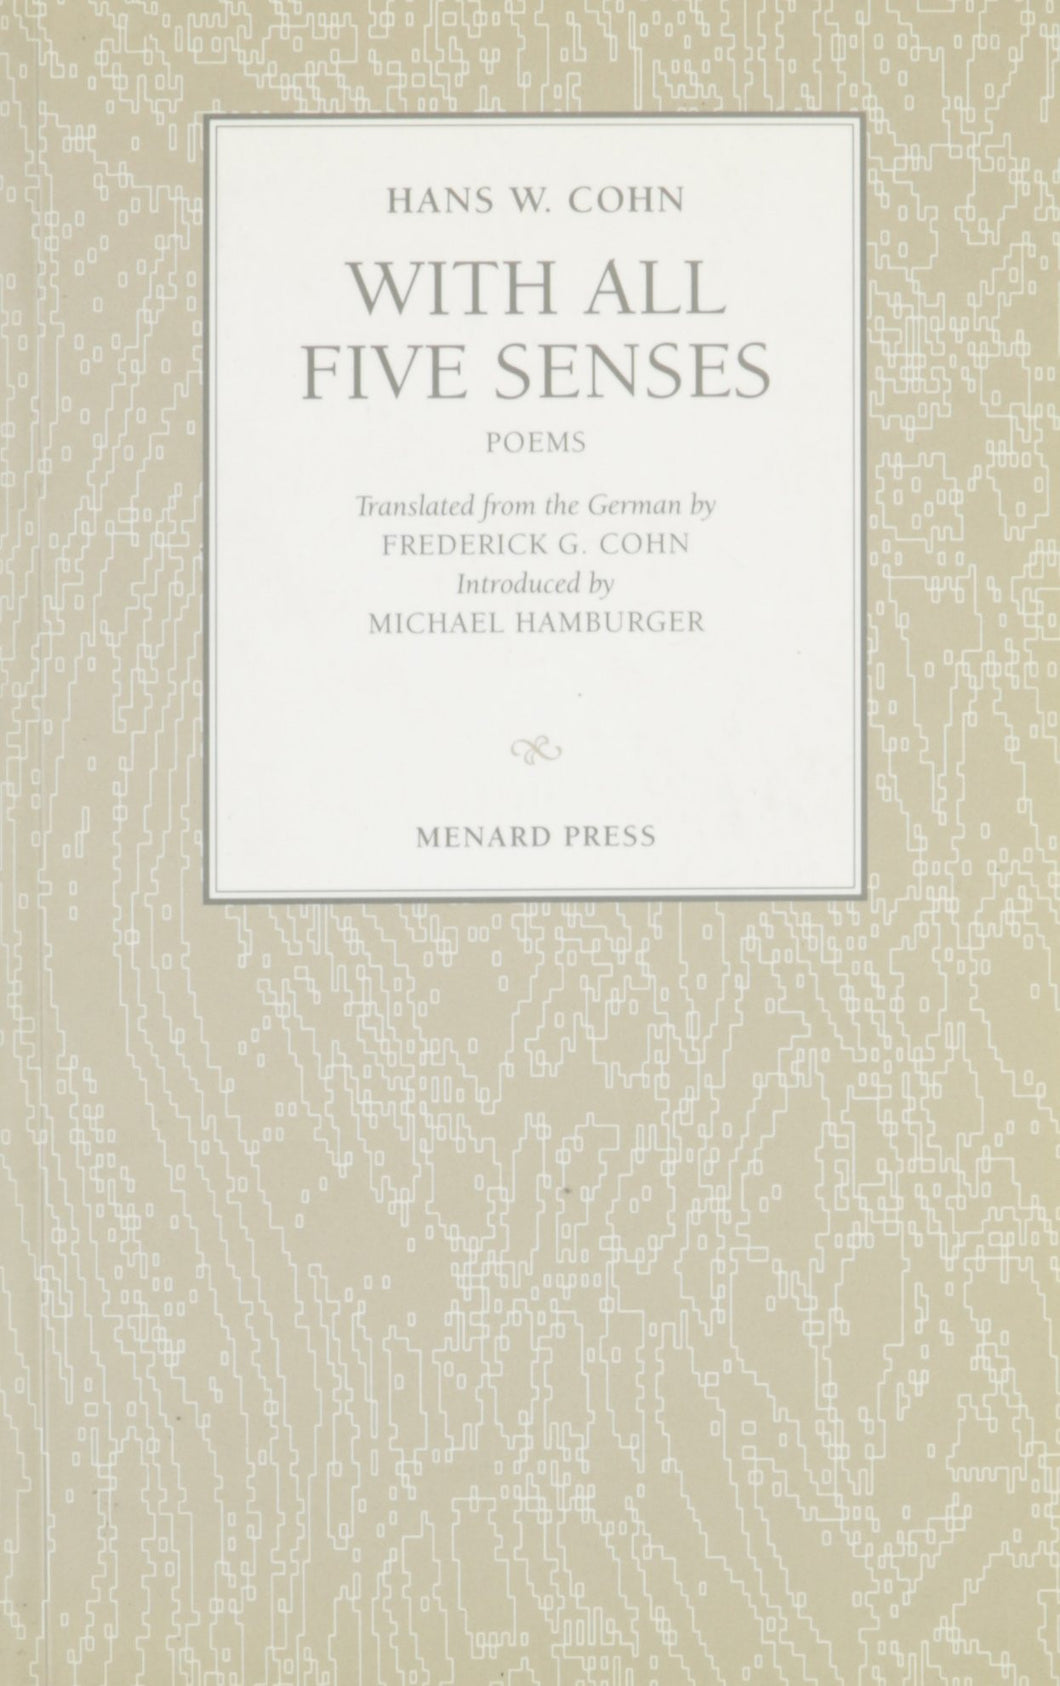 With all Five Senses